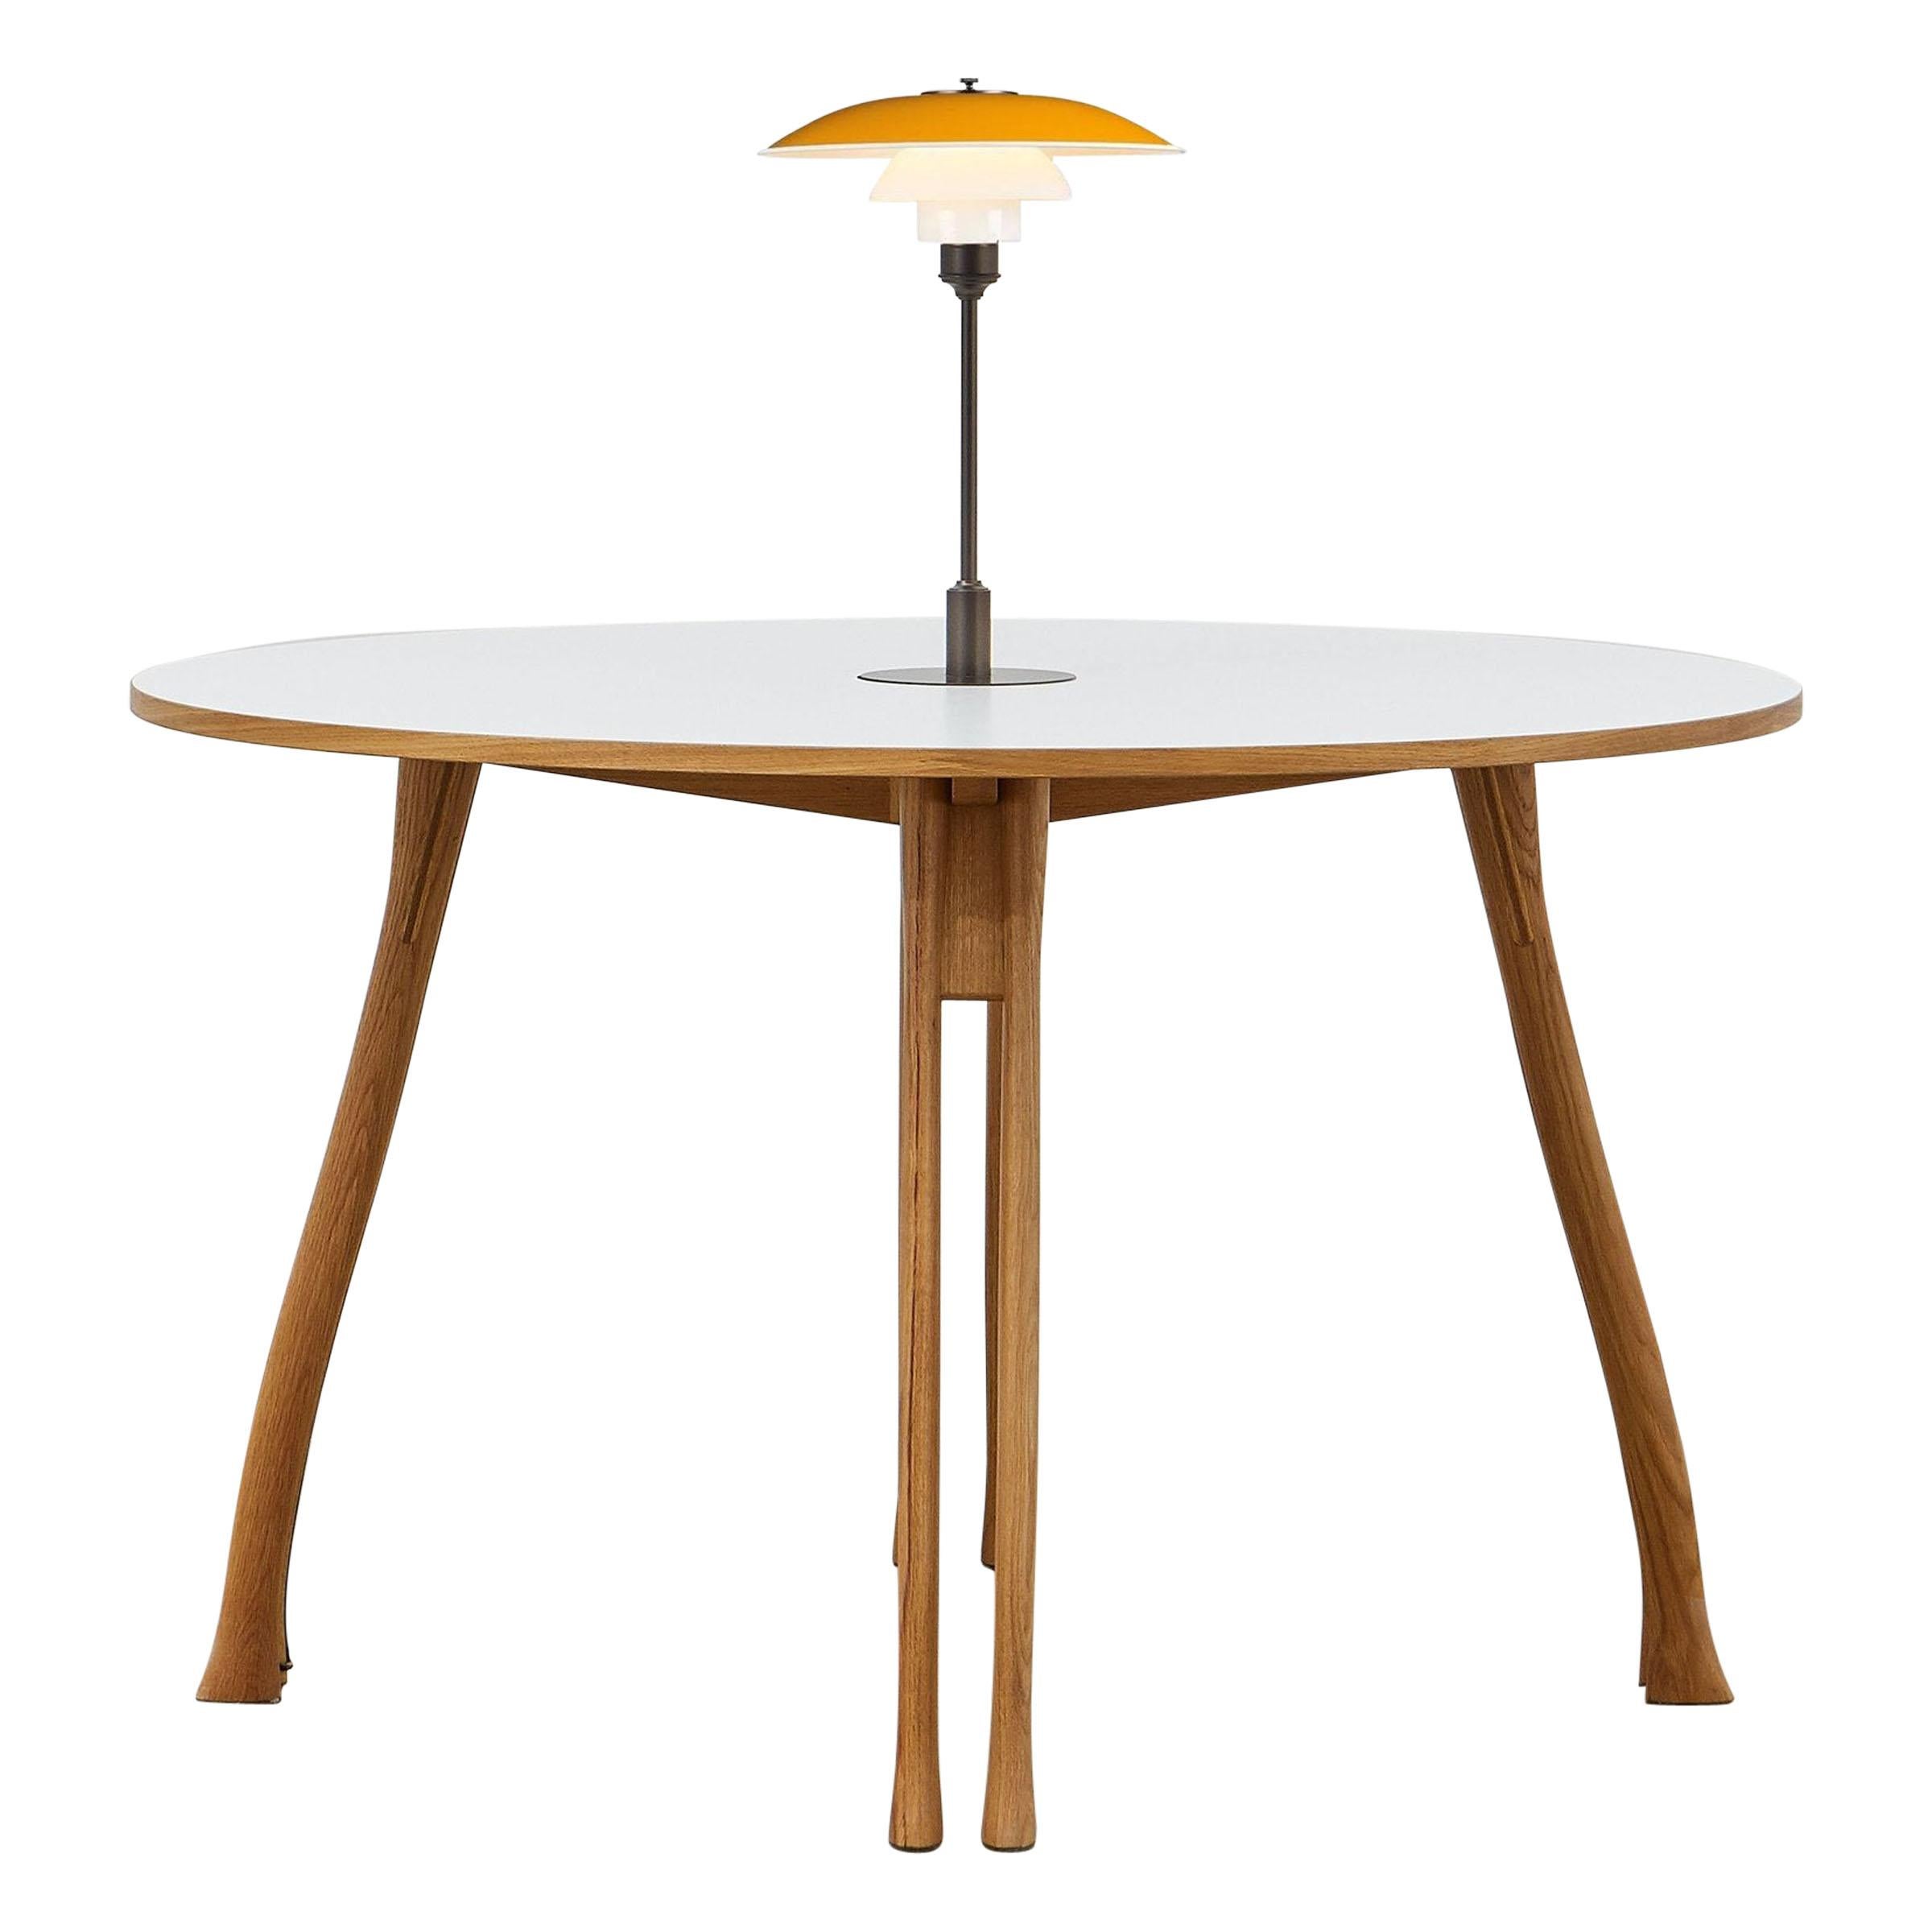 PH Axe Table, Natural Oak Legs, Laminated Plate, Yellow PH 3 ½ - 2 ½ Lamp For Sale